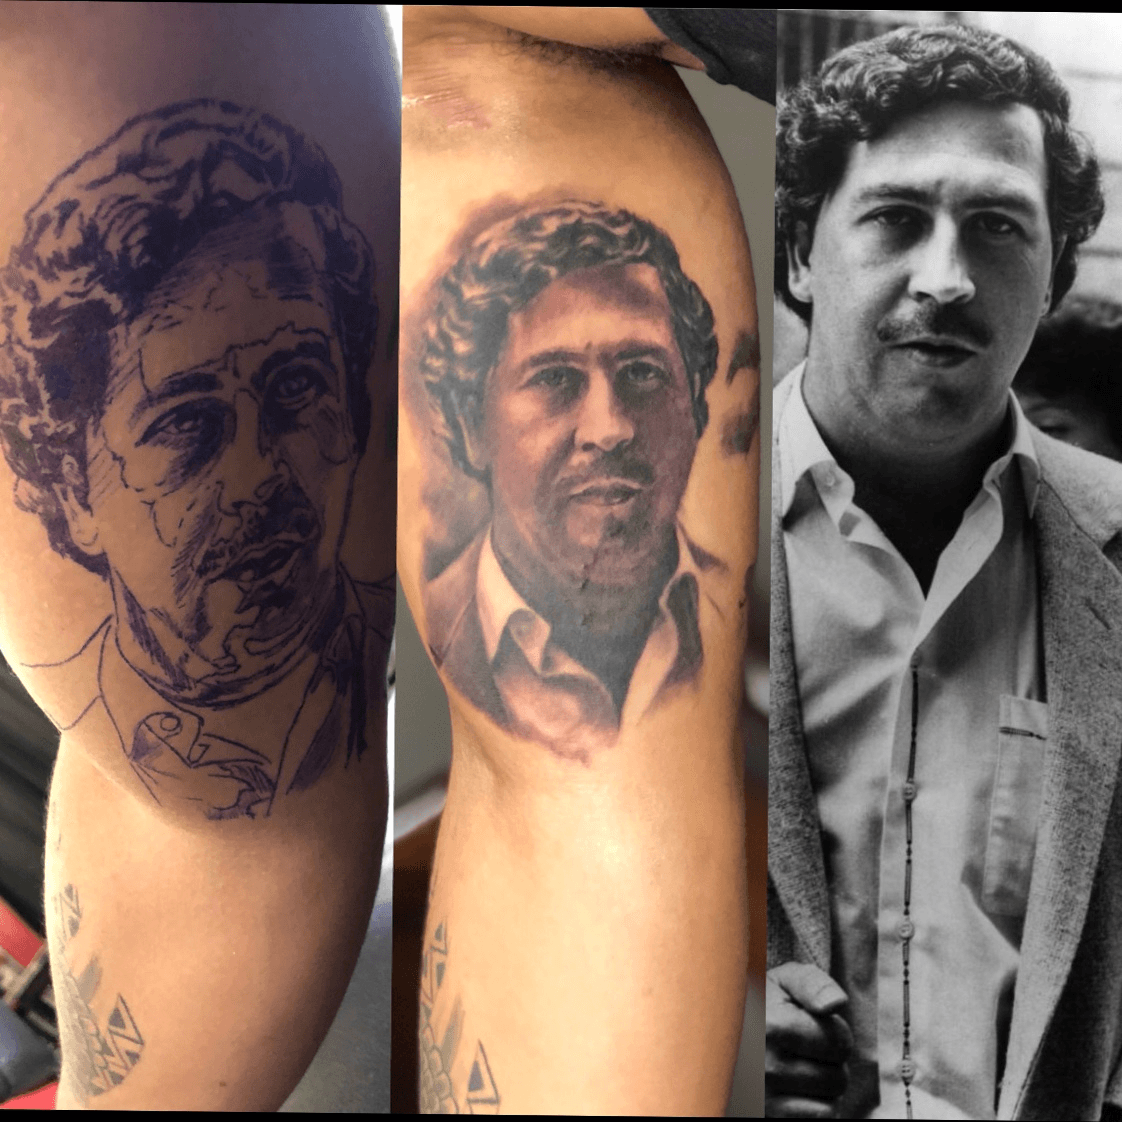 Pablo Escobar Tattoo  Highlighting The Dramatic Arc Of Escobars Life  From His Ascent To Power To His Eventual Downfall  Psycho Tats